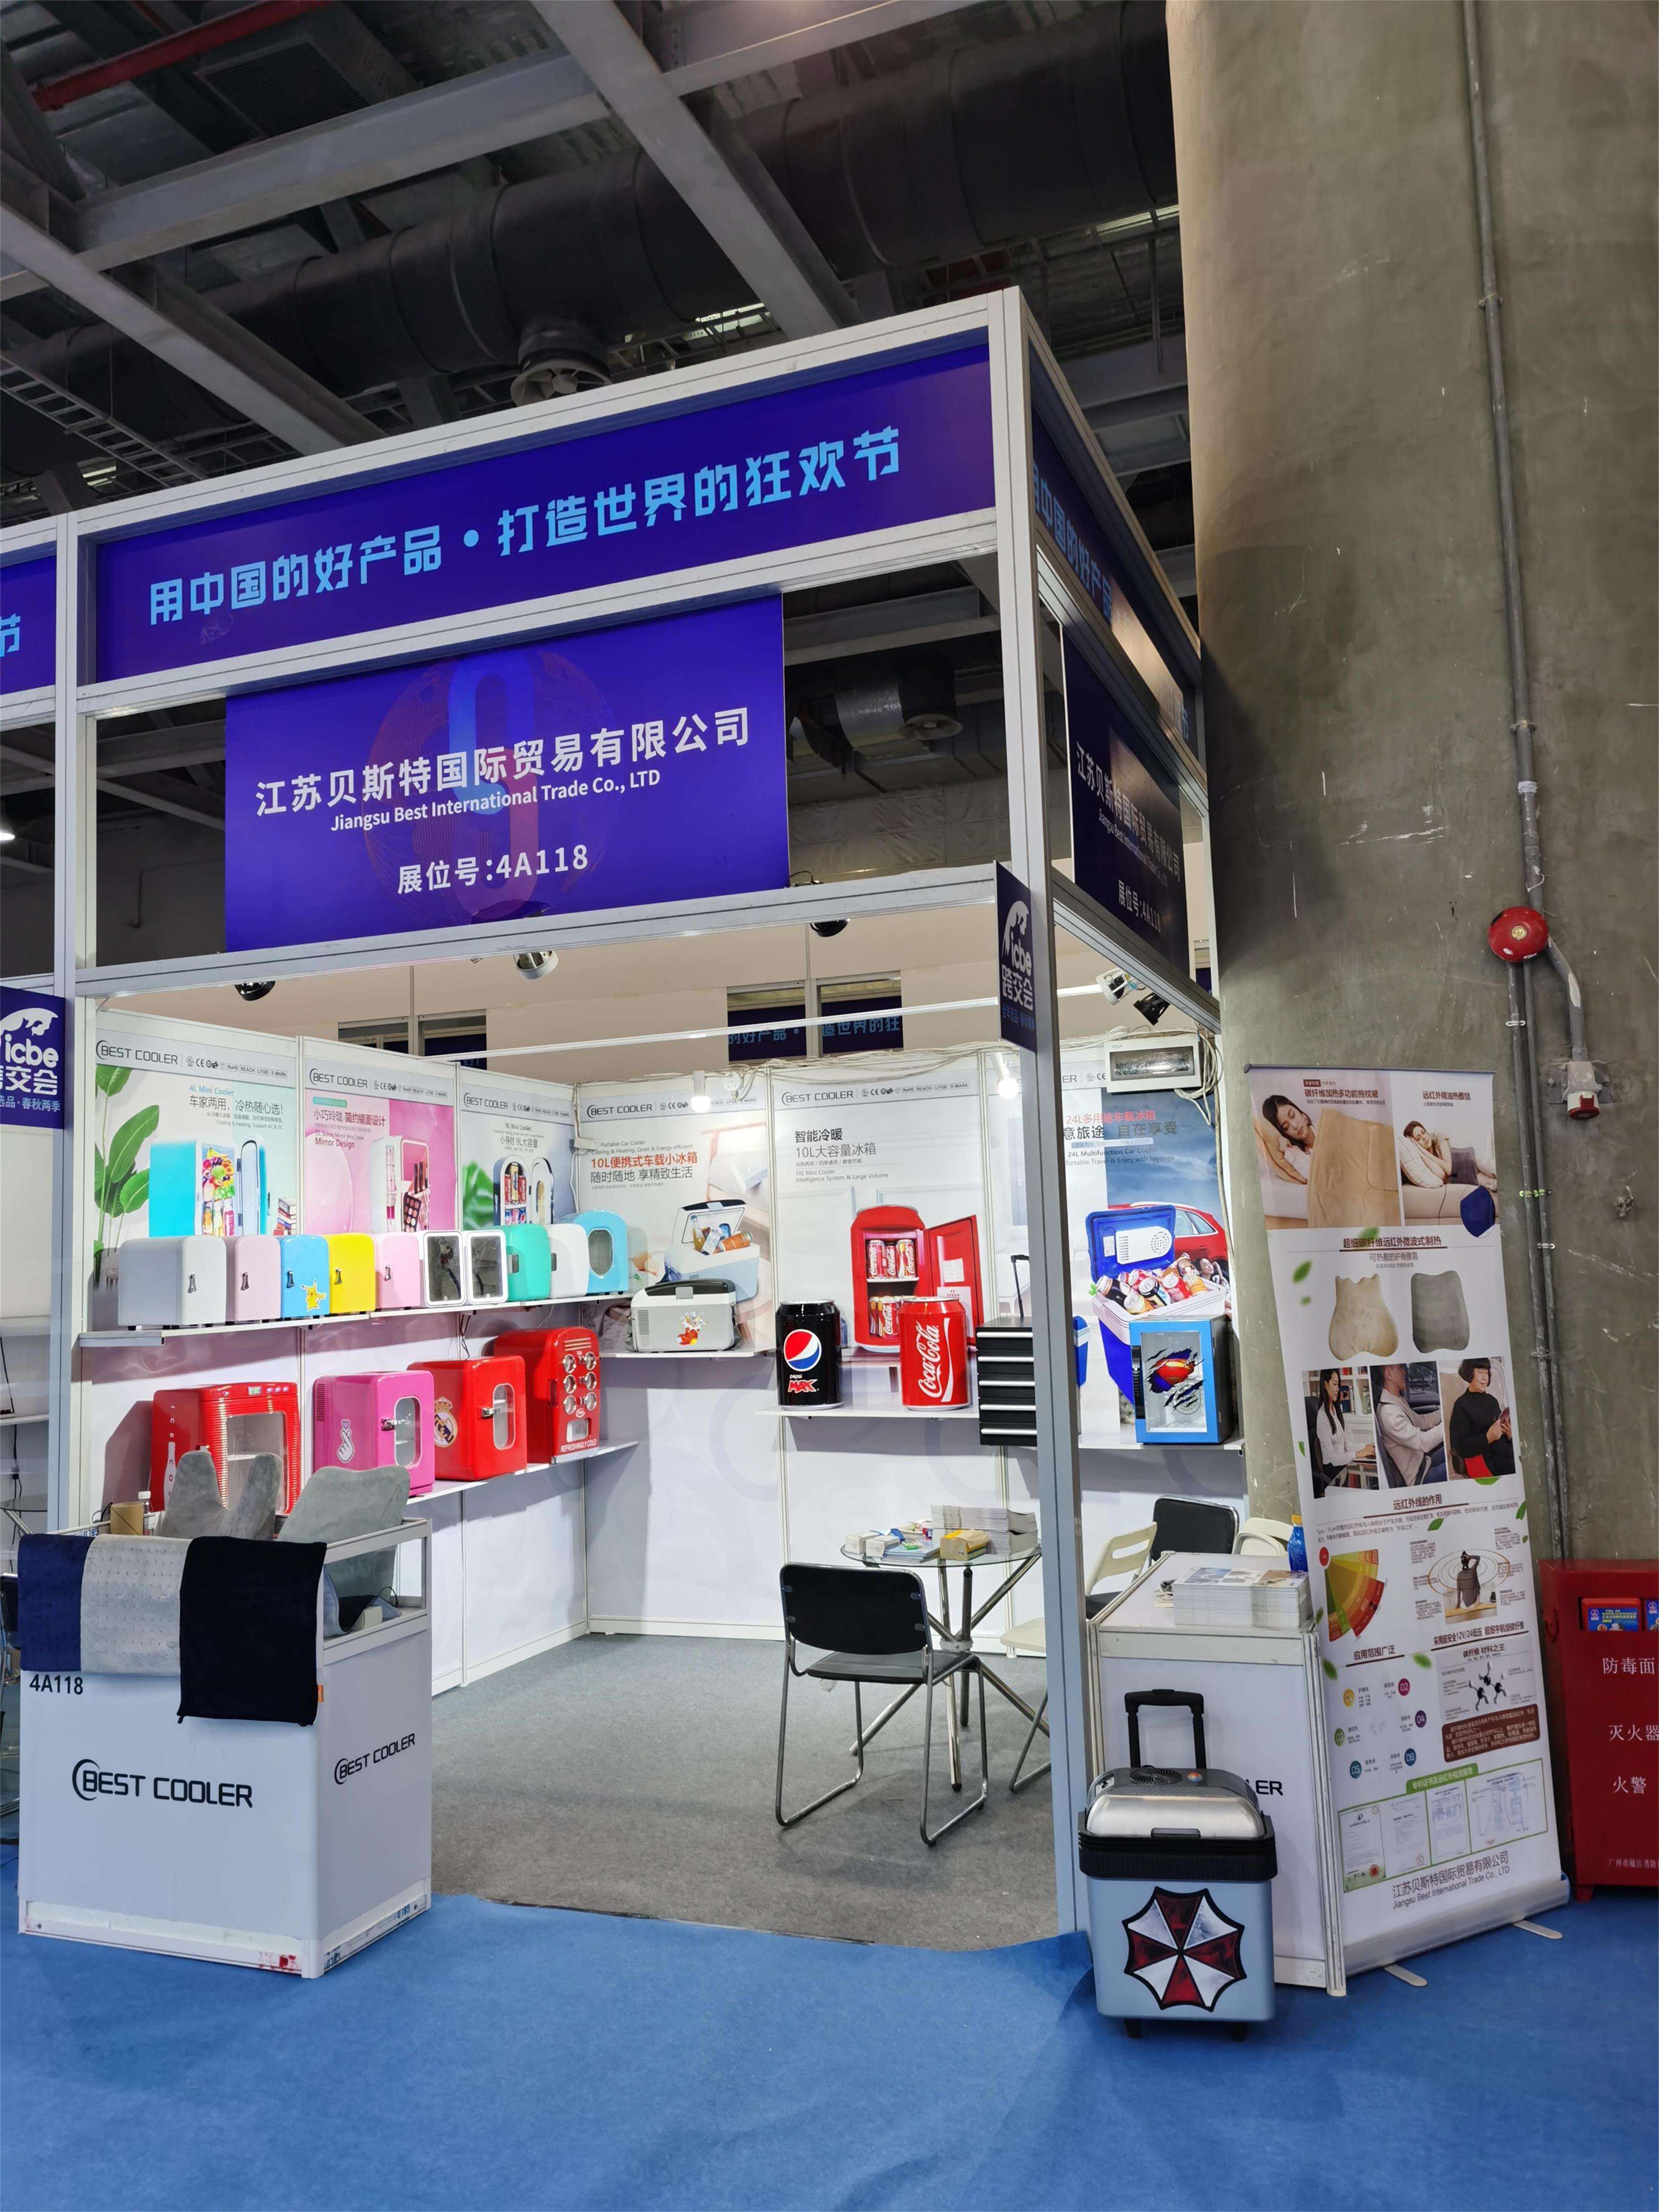 We attended ICBE in Guangzhou from 7-9th Apr 2021 at booth 4A118